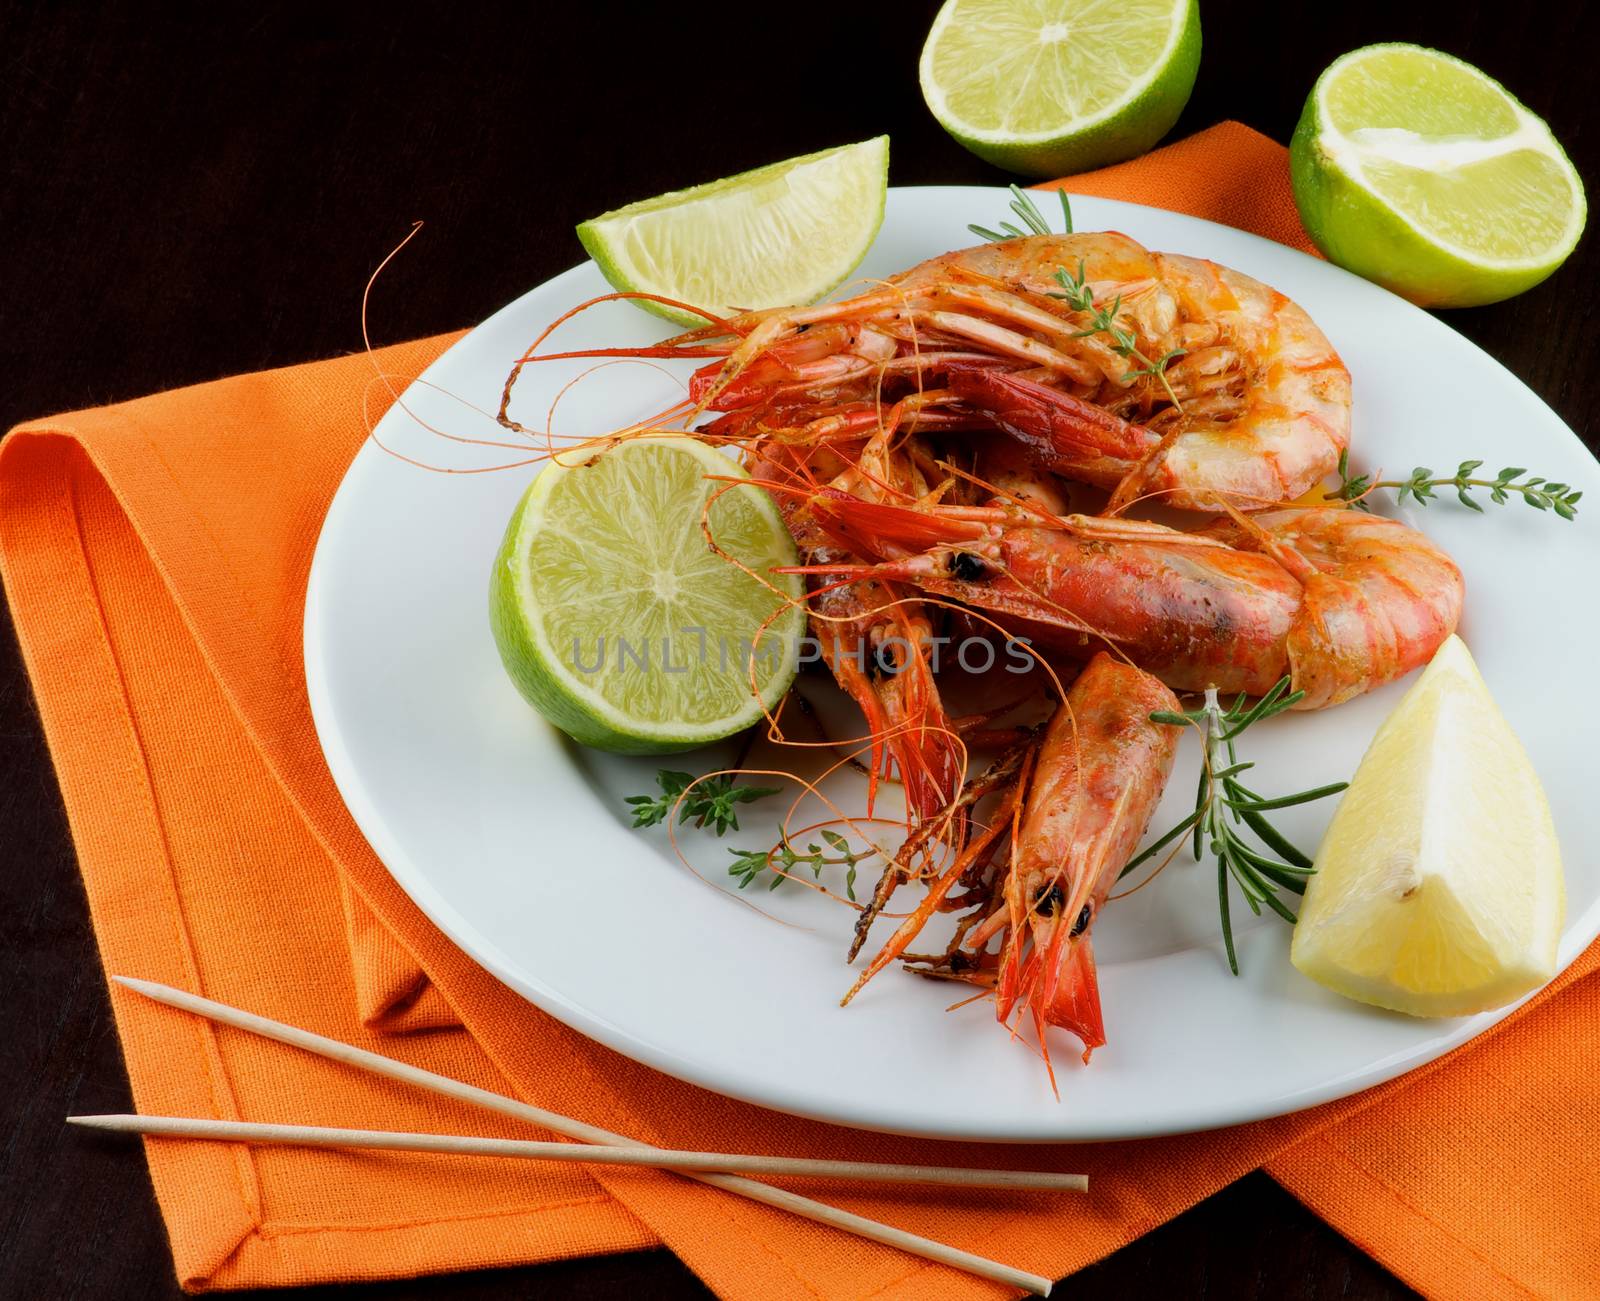 Delicious Roasted Shrimps  with Thyme, Lime and Rosemary on White Plate and Orange Napkin closeup on Dark Wooden background